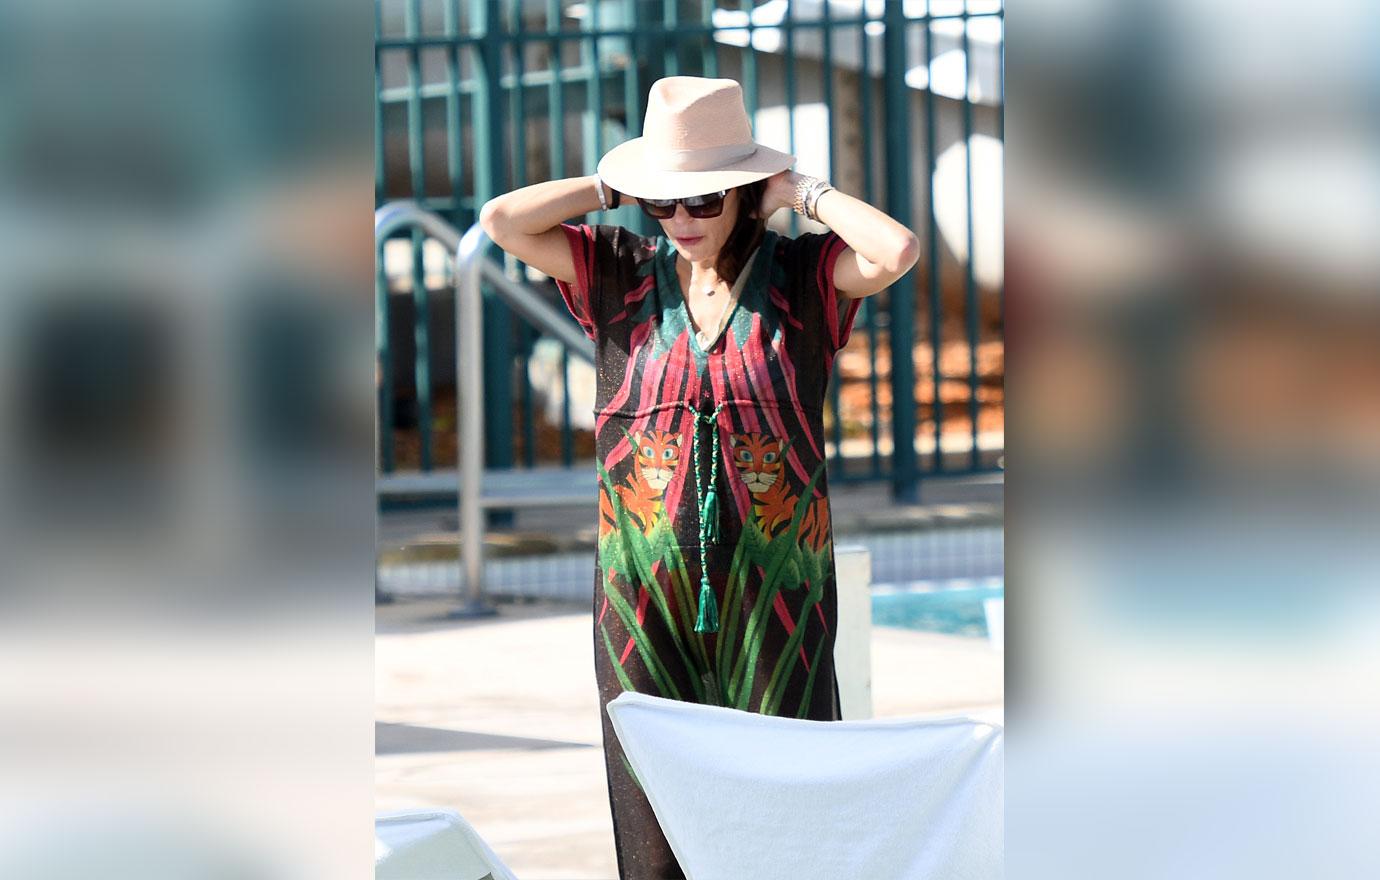 Bethenny Frankel Wears Odd Swimsuit While Taking A Dip In Miami